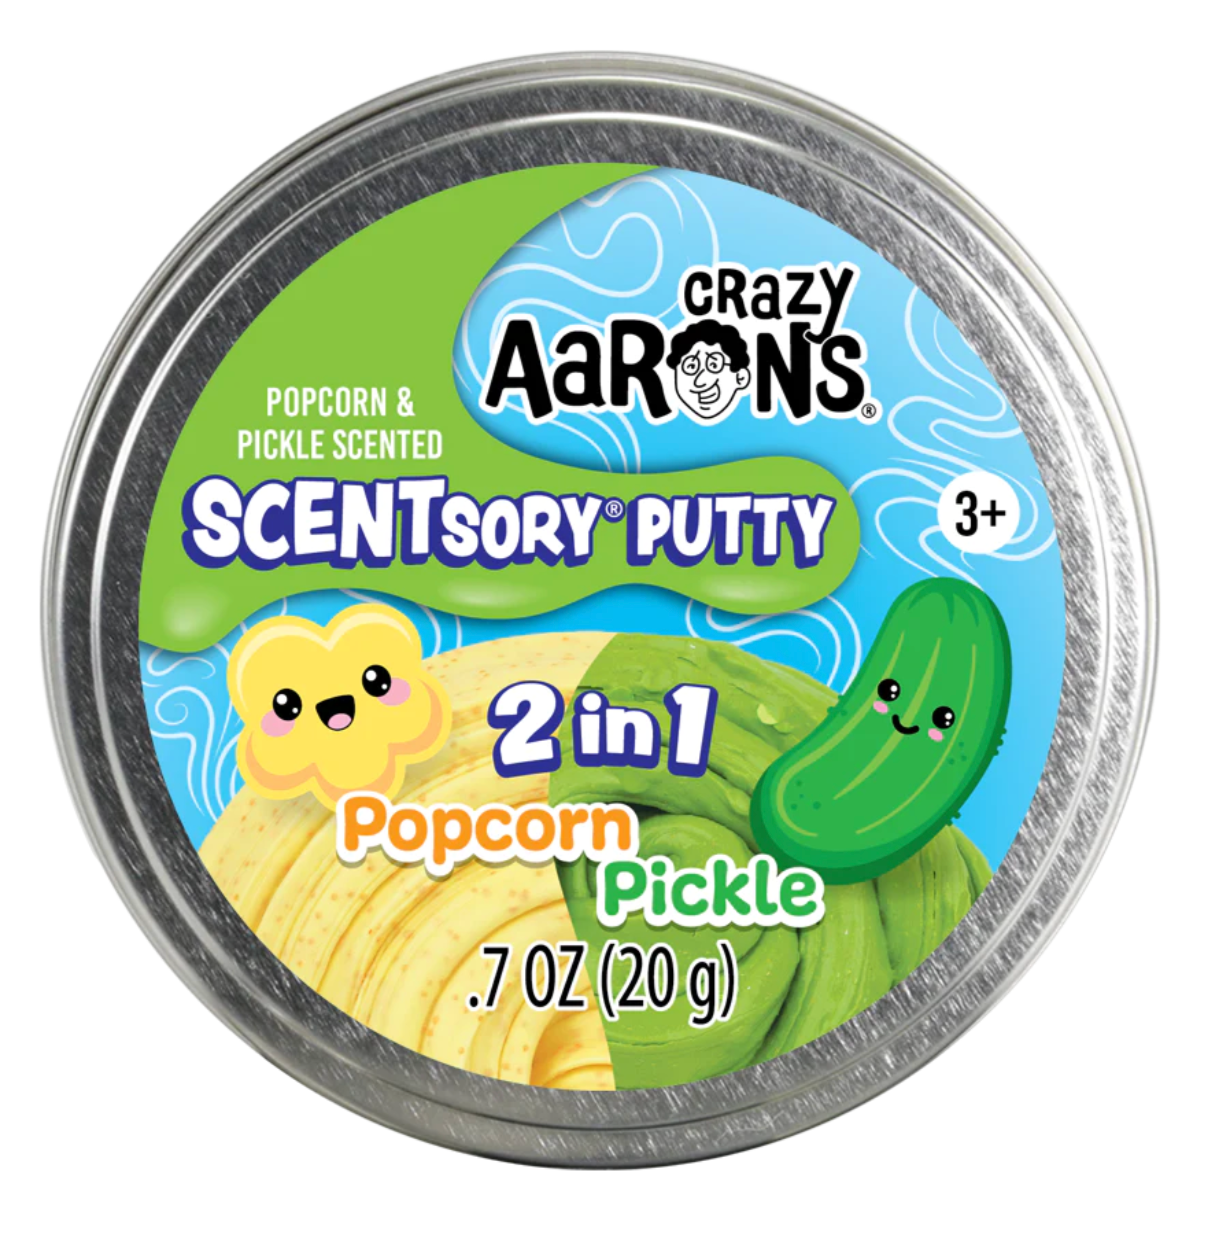 Crazy Aaron's SCENTsory Putty - 2 in 1